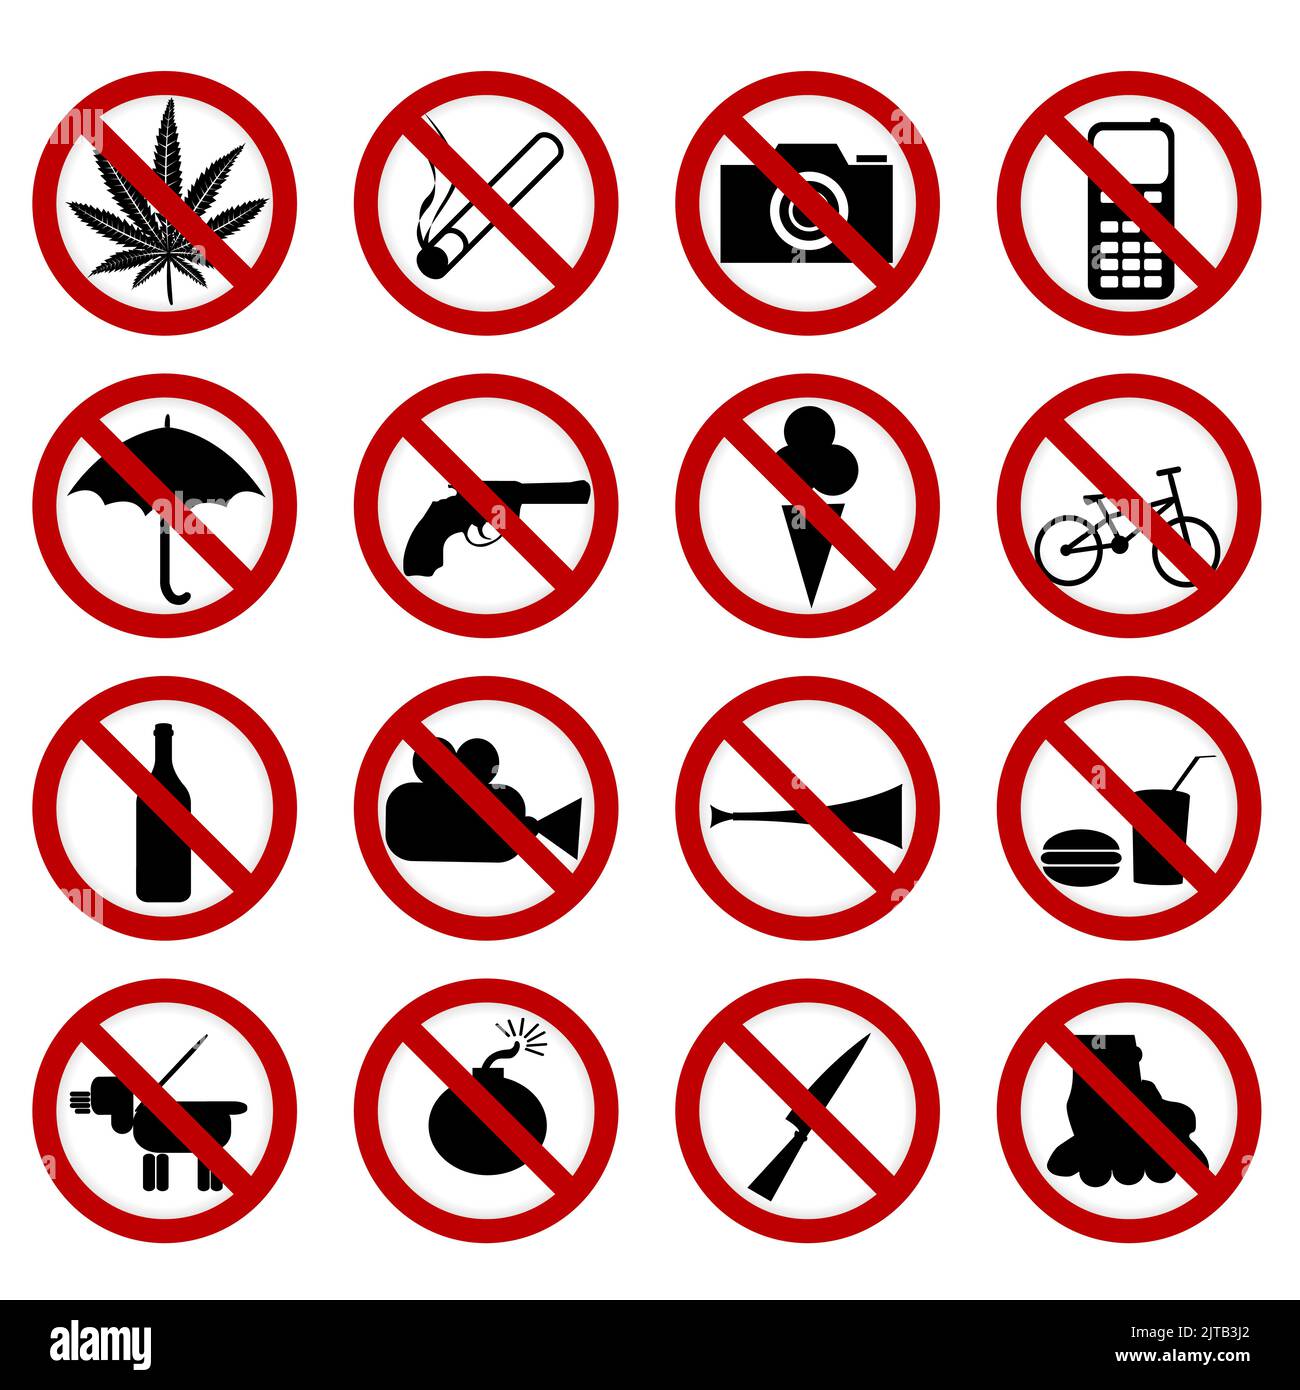 Set of prohibition signs for public events on white background Stock Vector